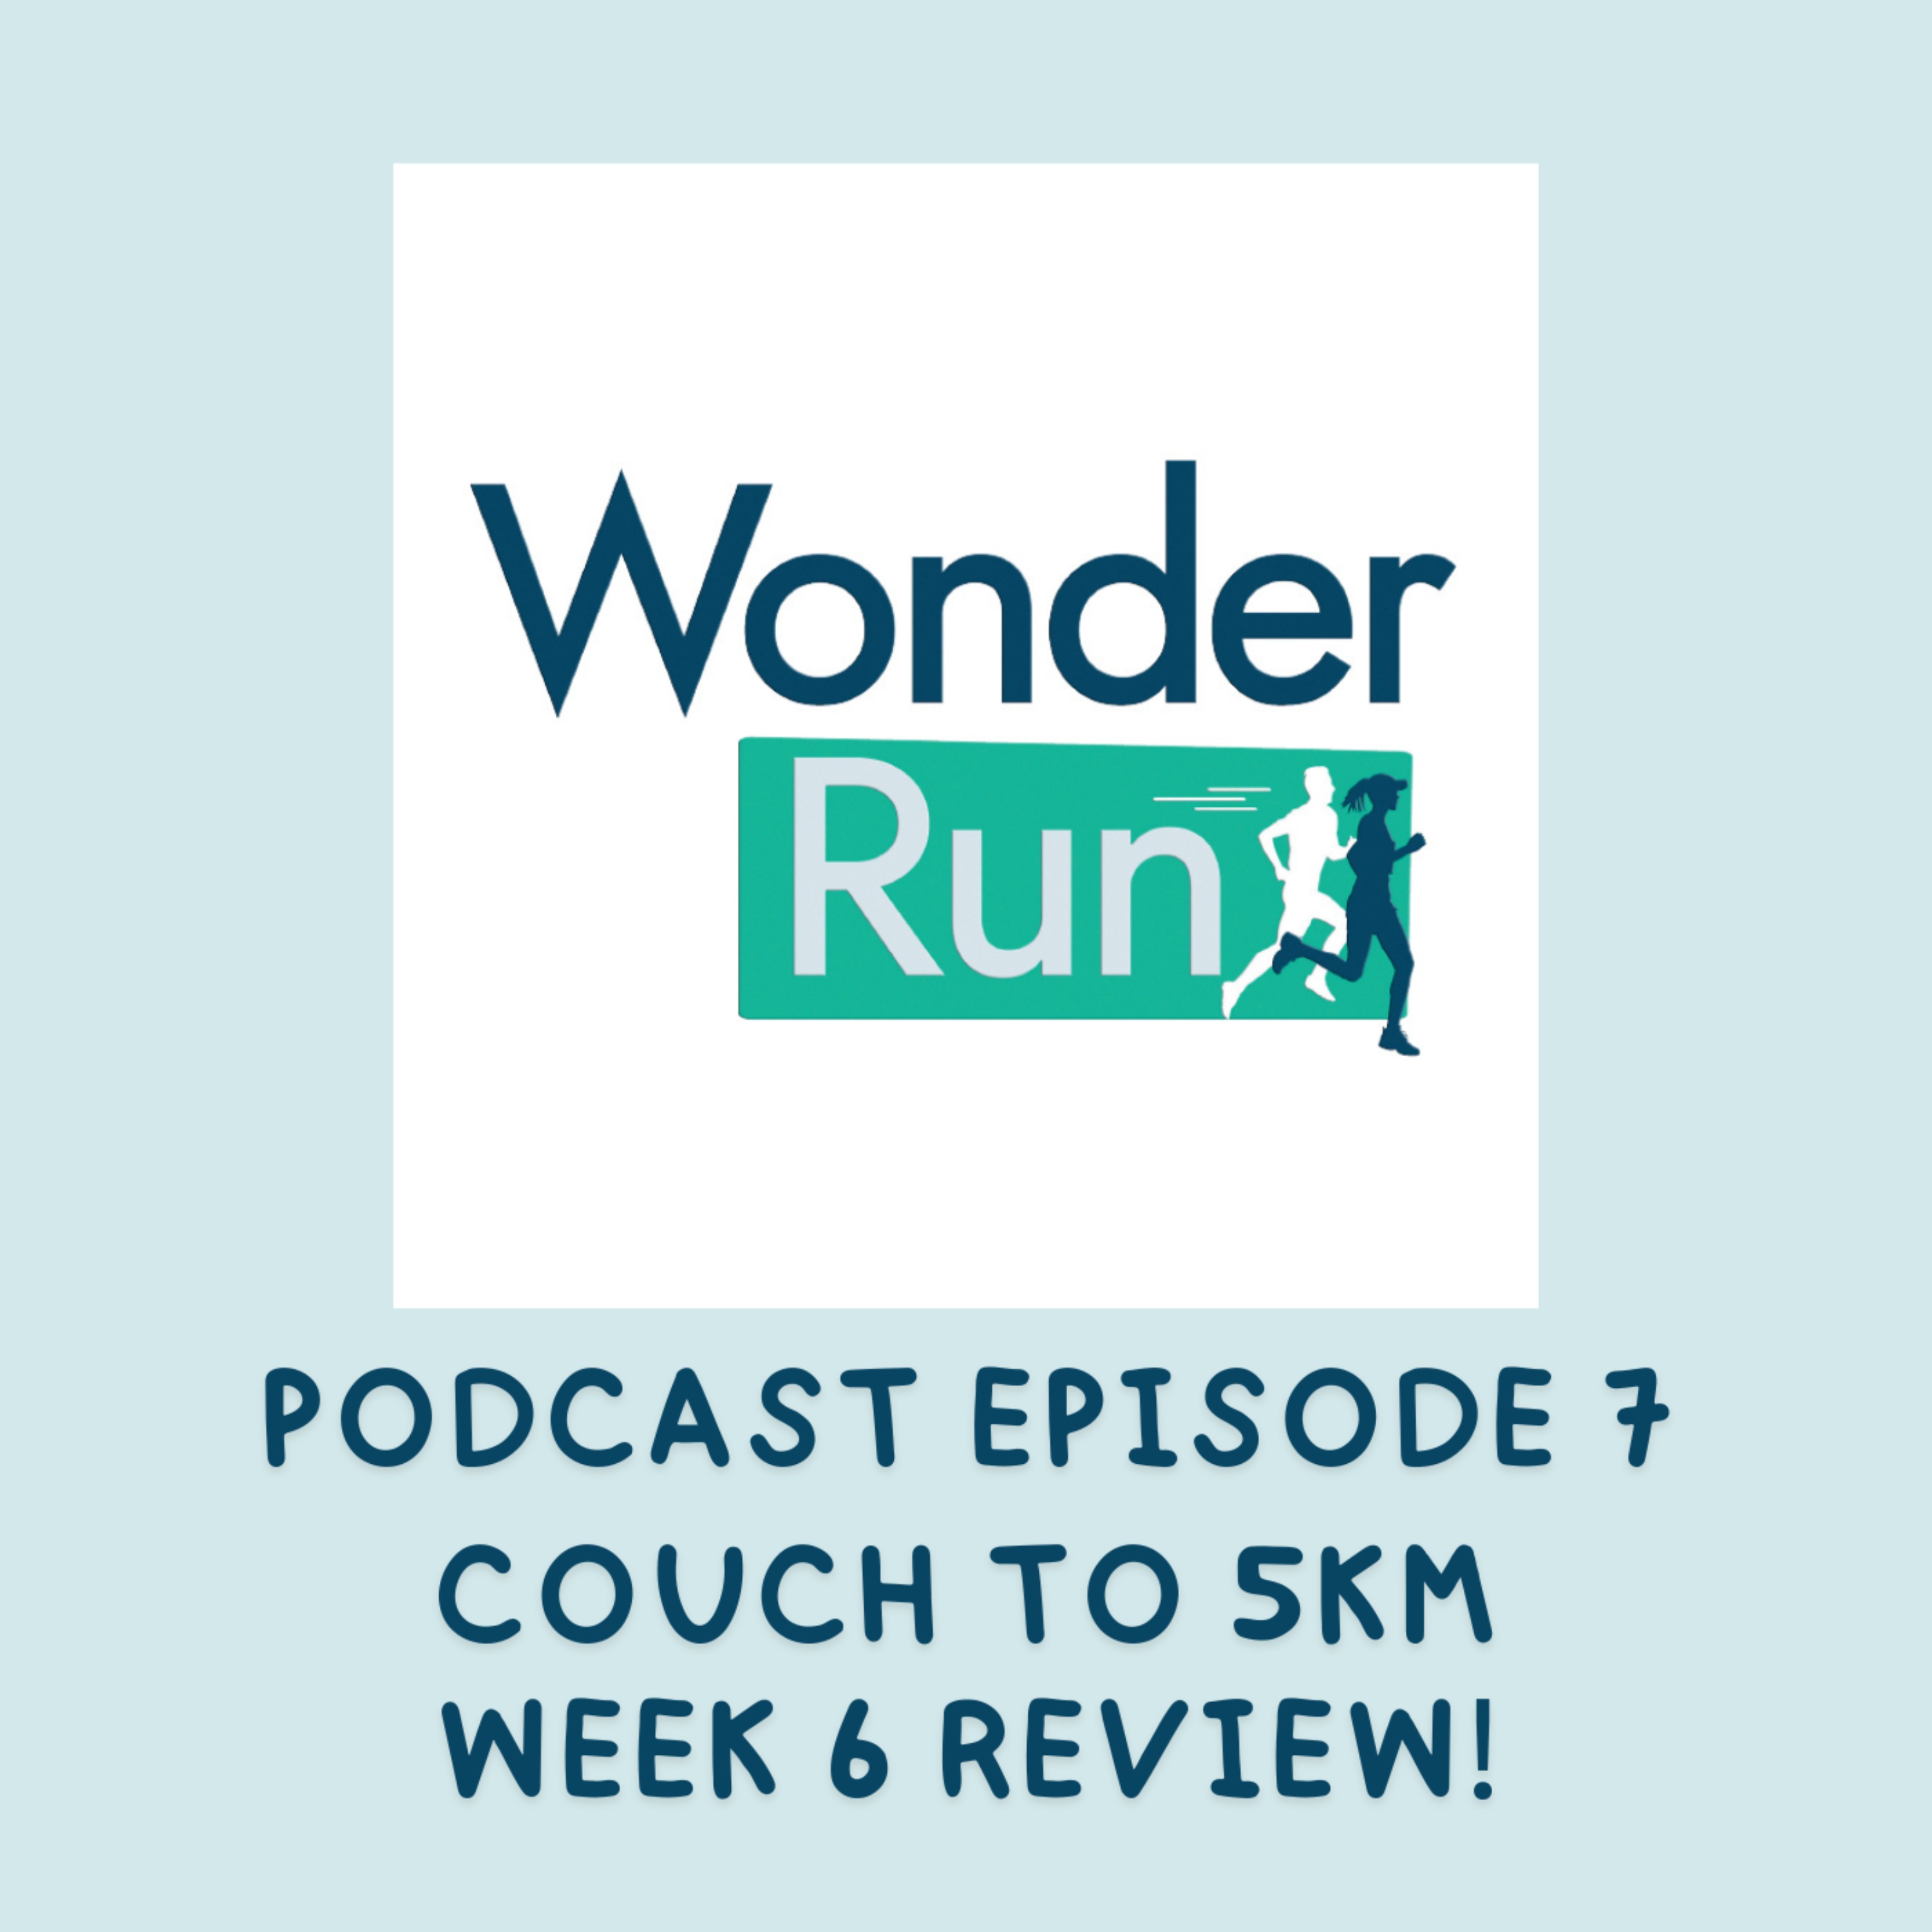 Couch to 5km - Week 6 Review!